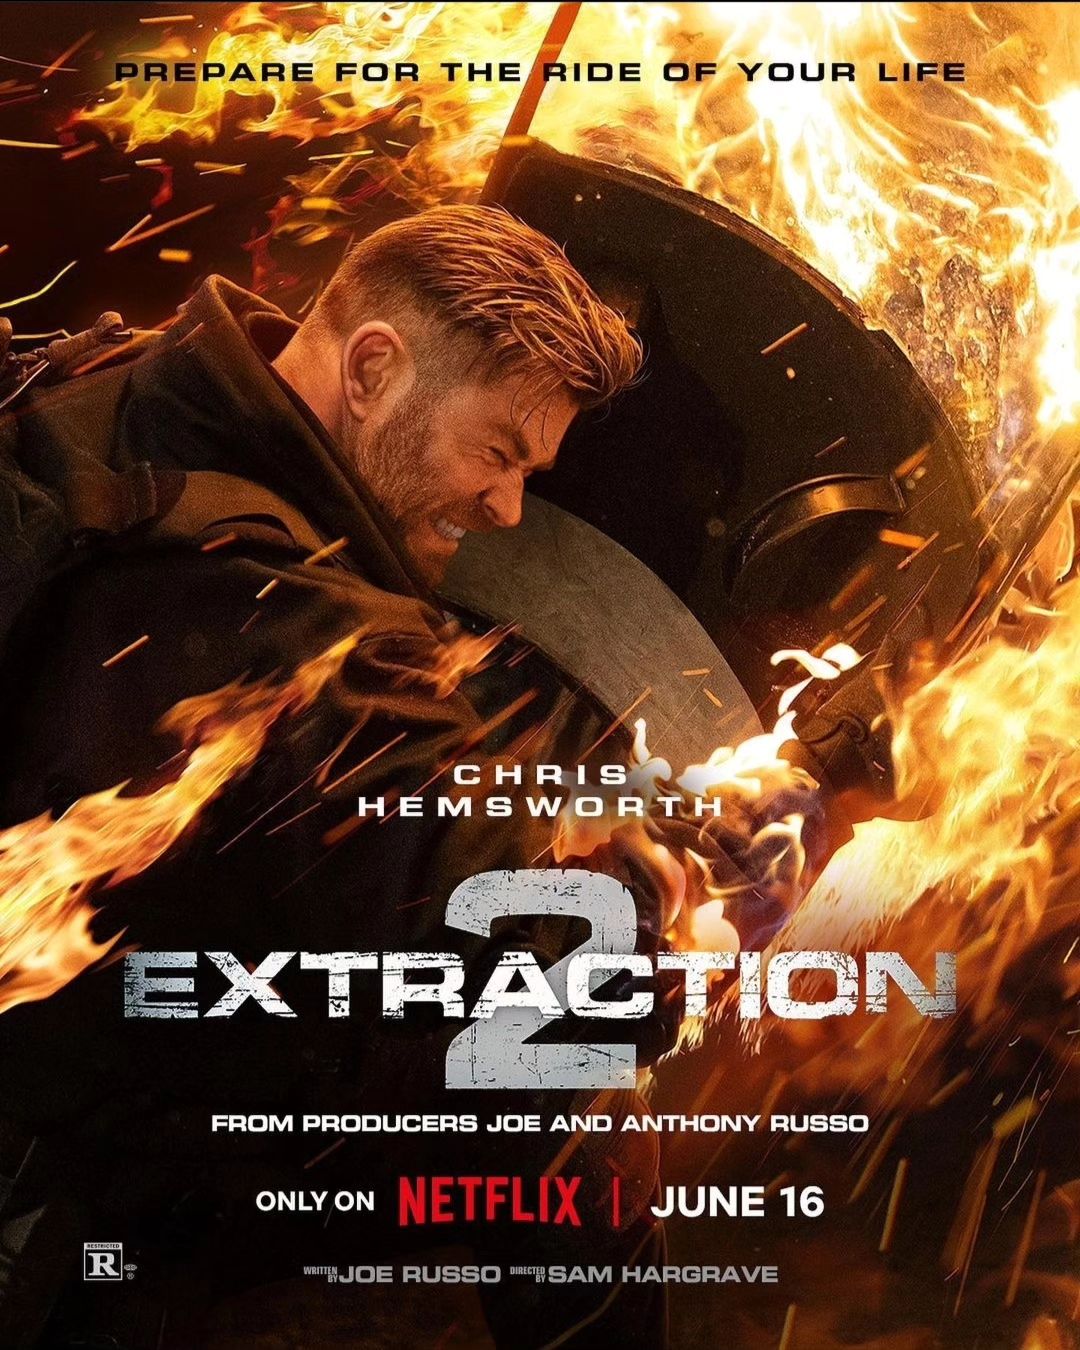 What time does Extraction 2 come out on Netflix